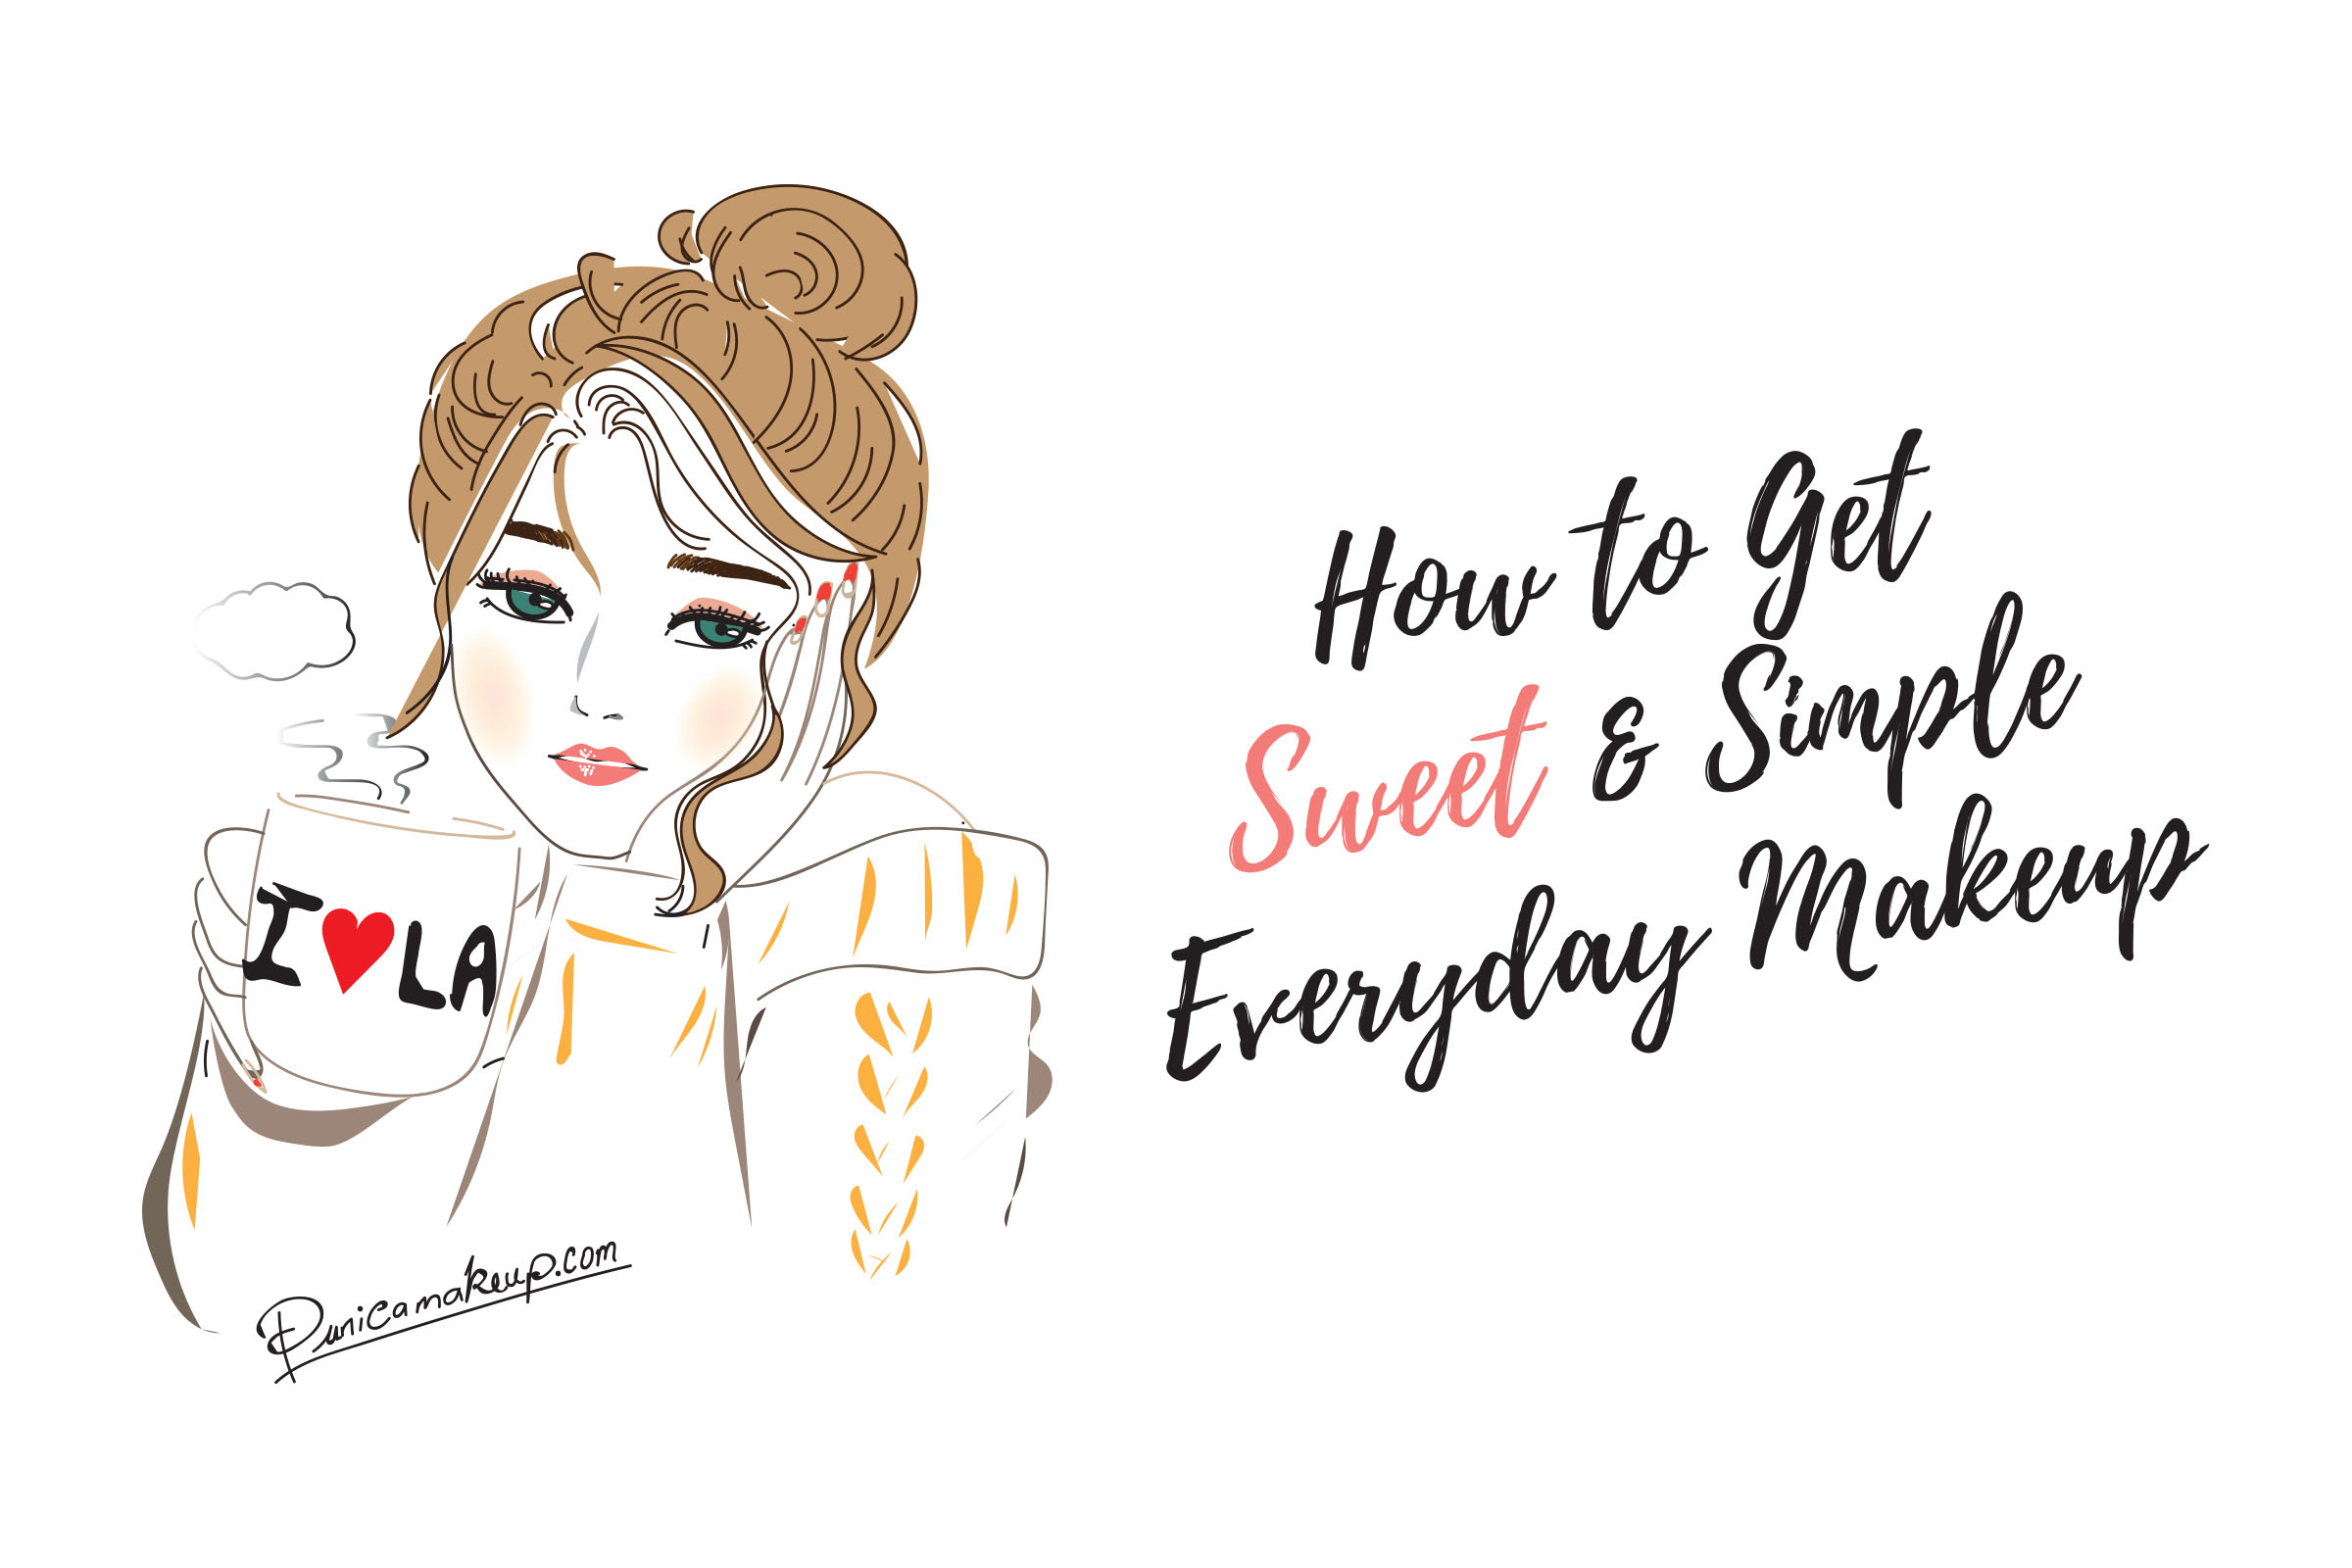 How to Get Sweet & Simple Everyday Makeup